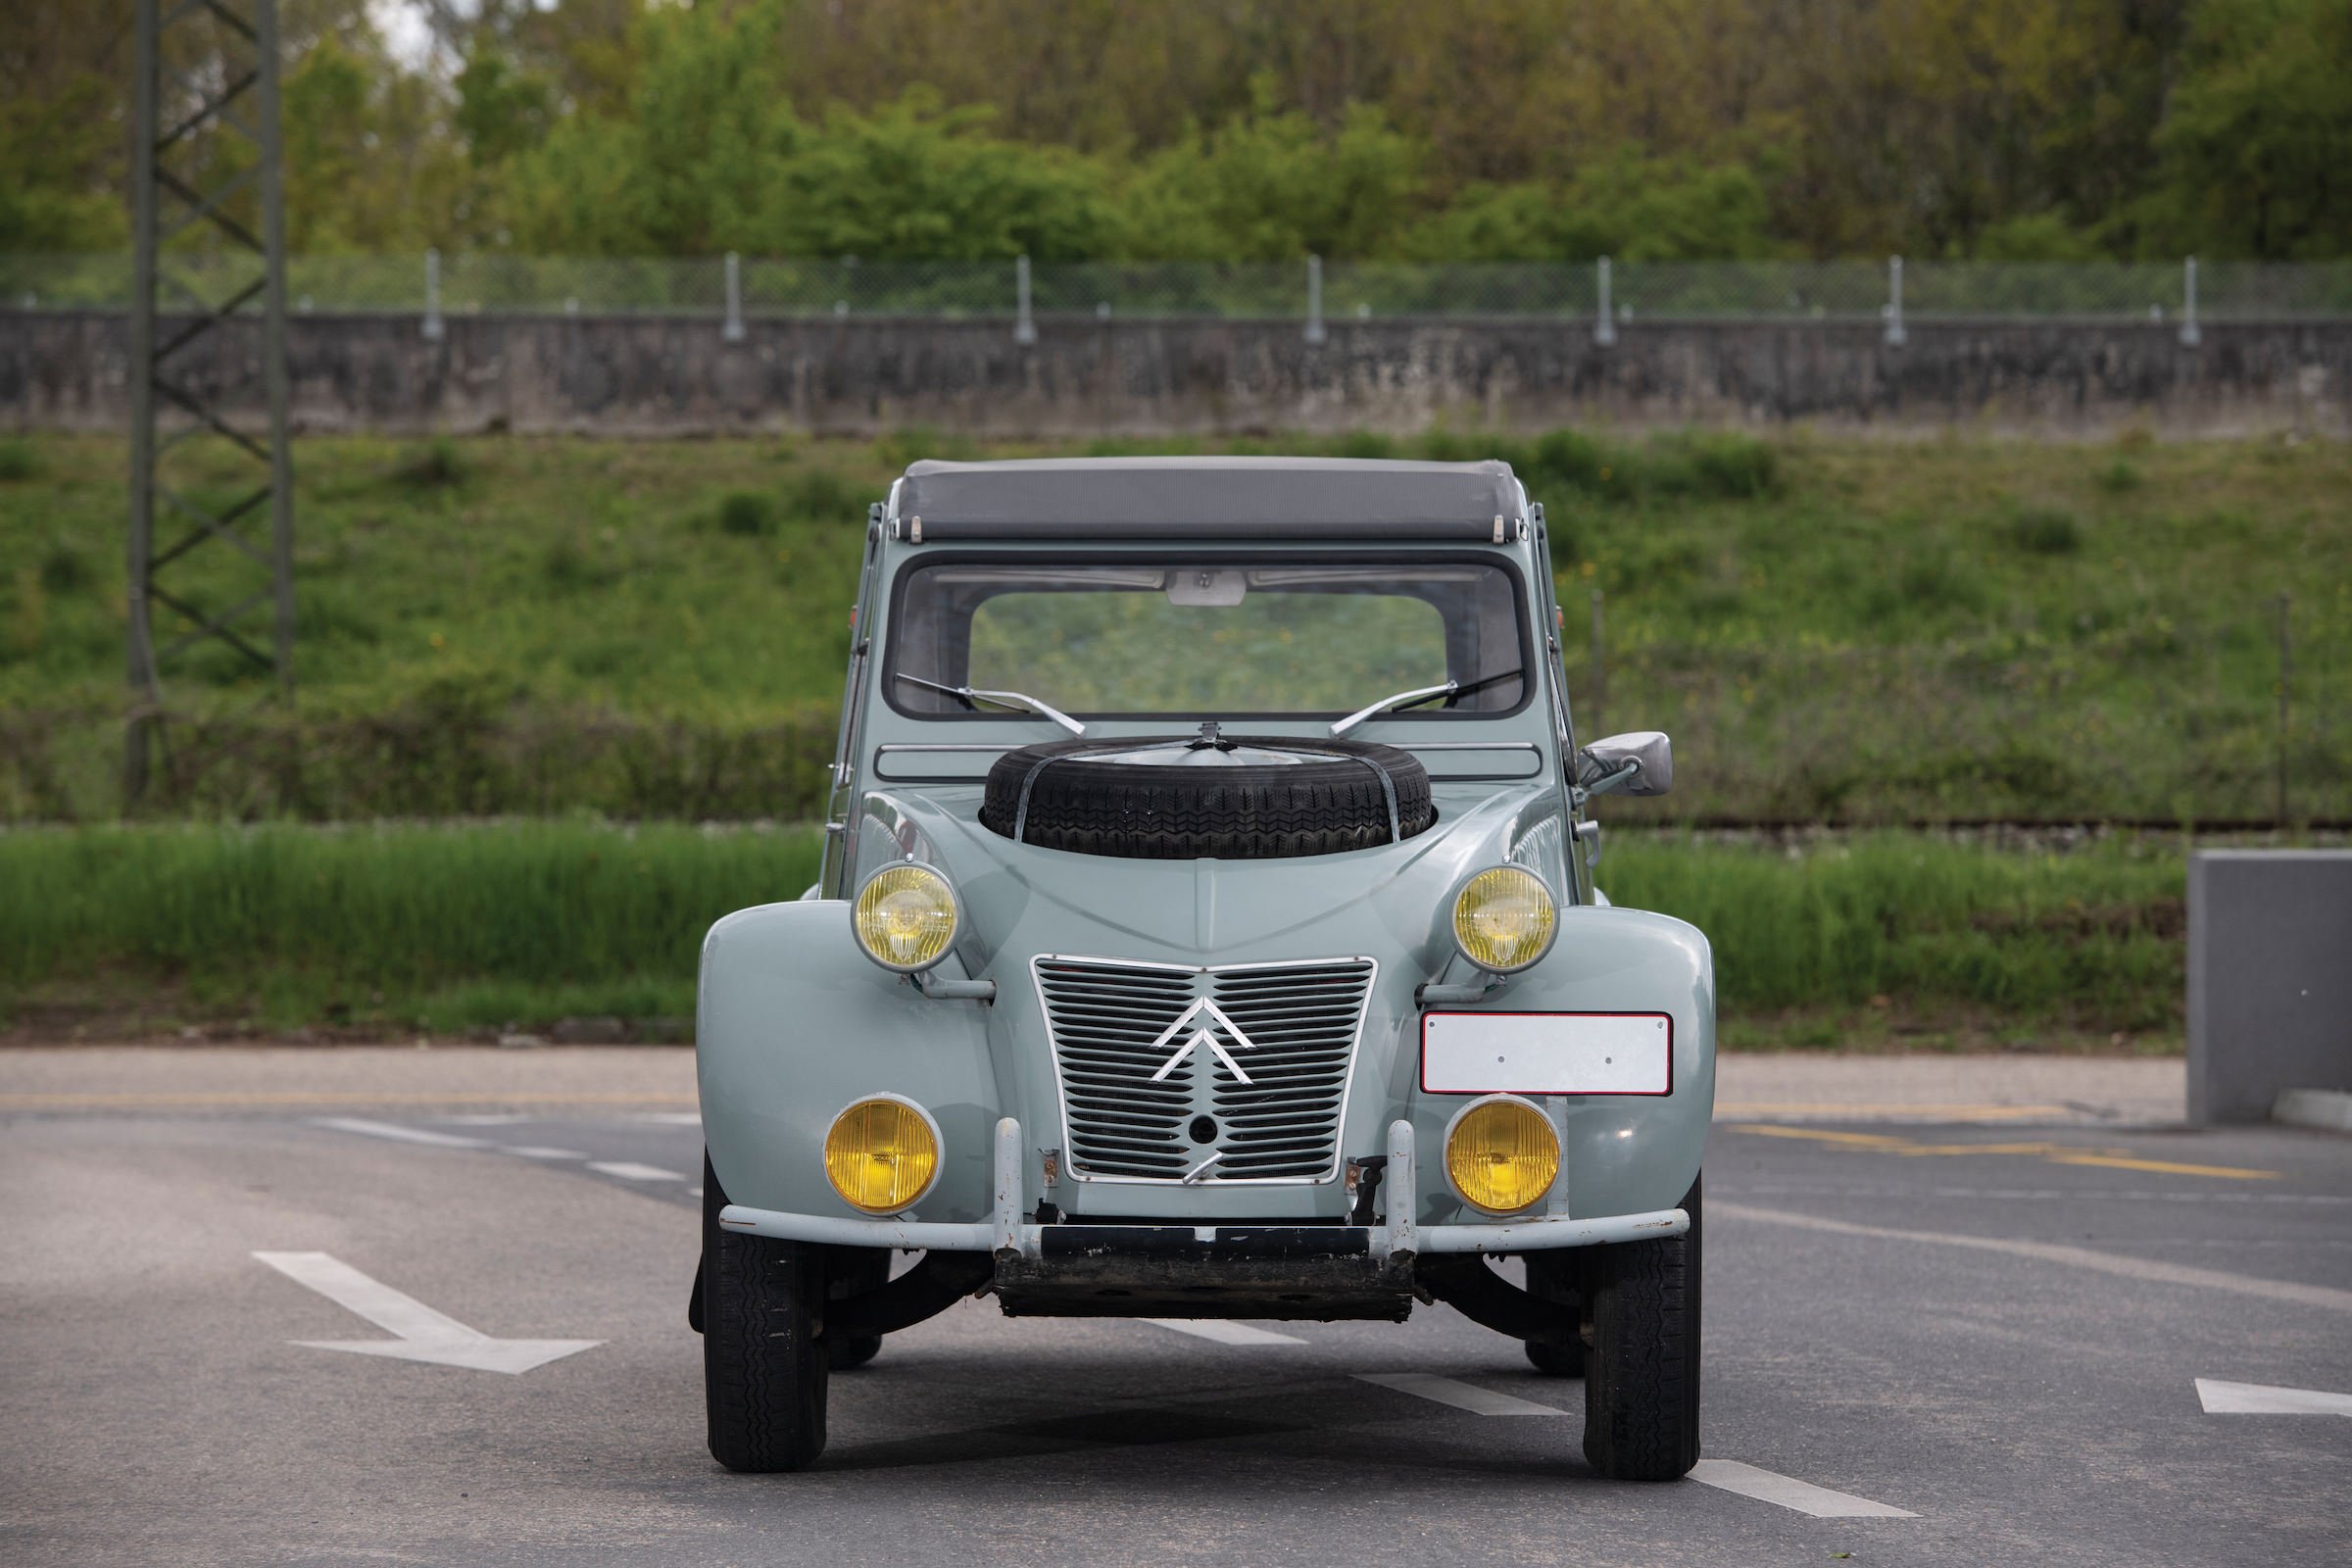 The Citroën 2CV 4x4 Sahara - The Unstoppable French Answer To The Land Rover